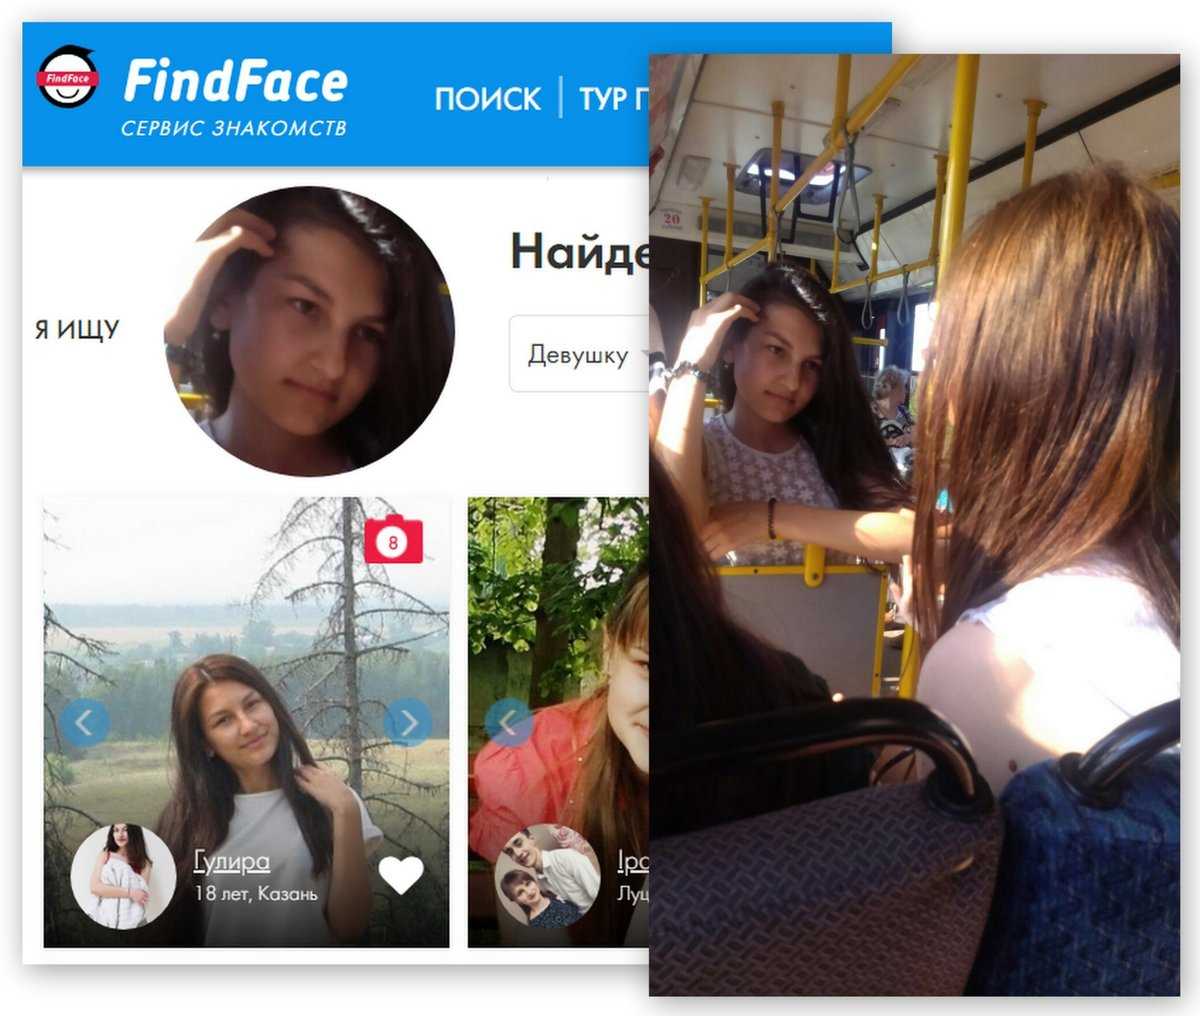 Findface